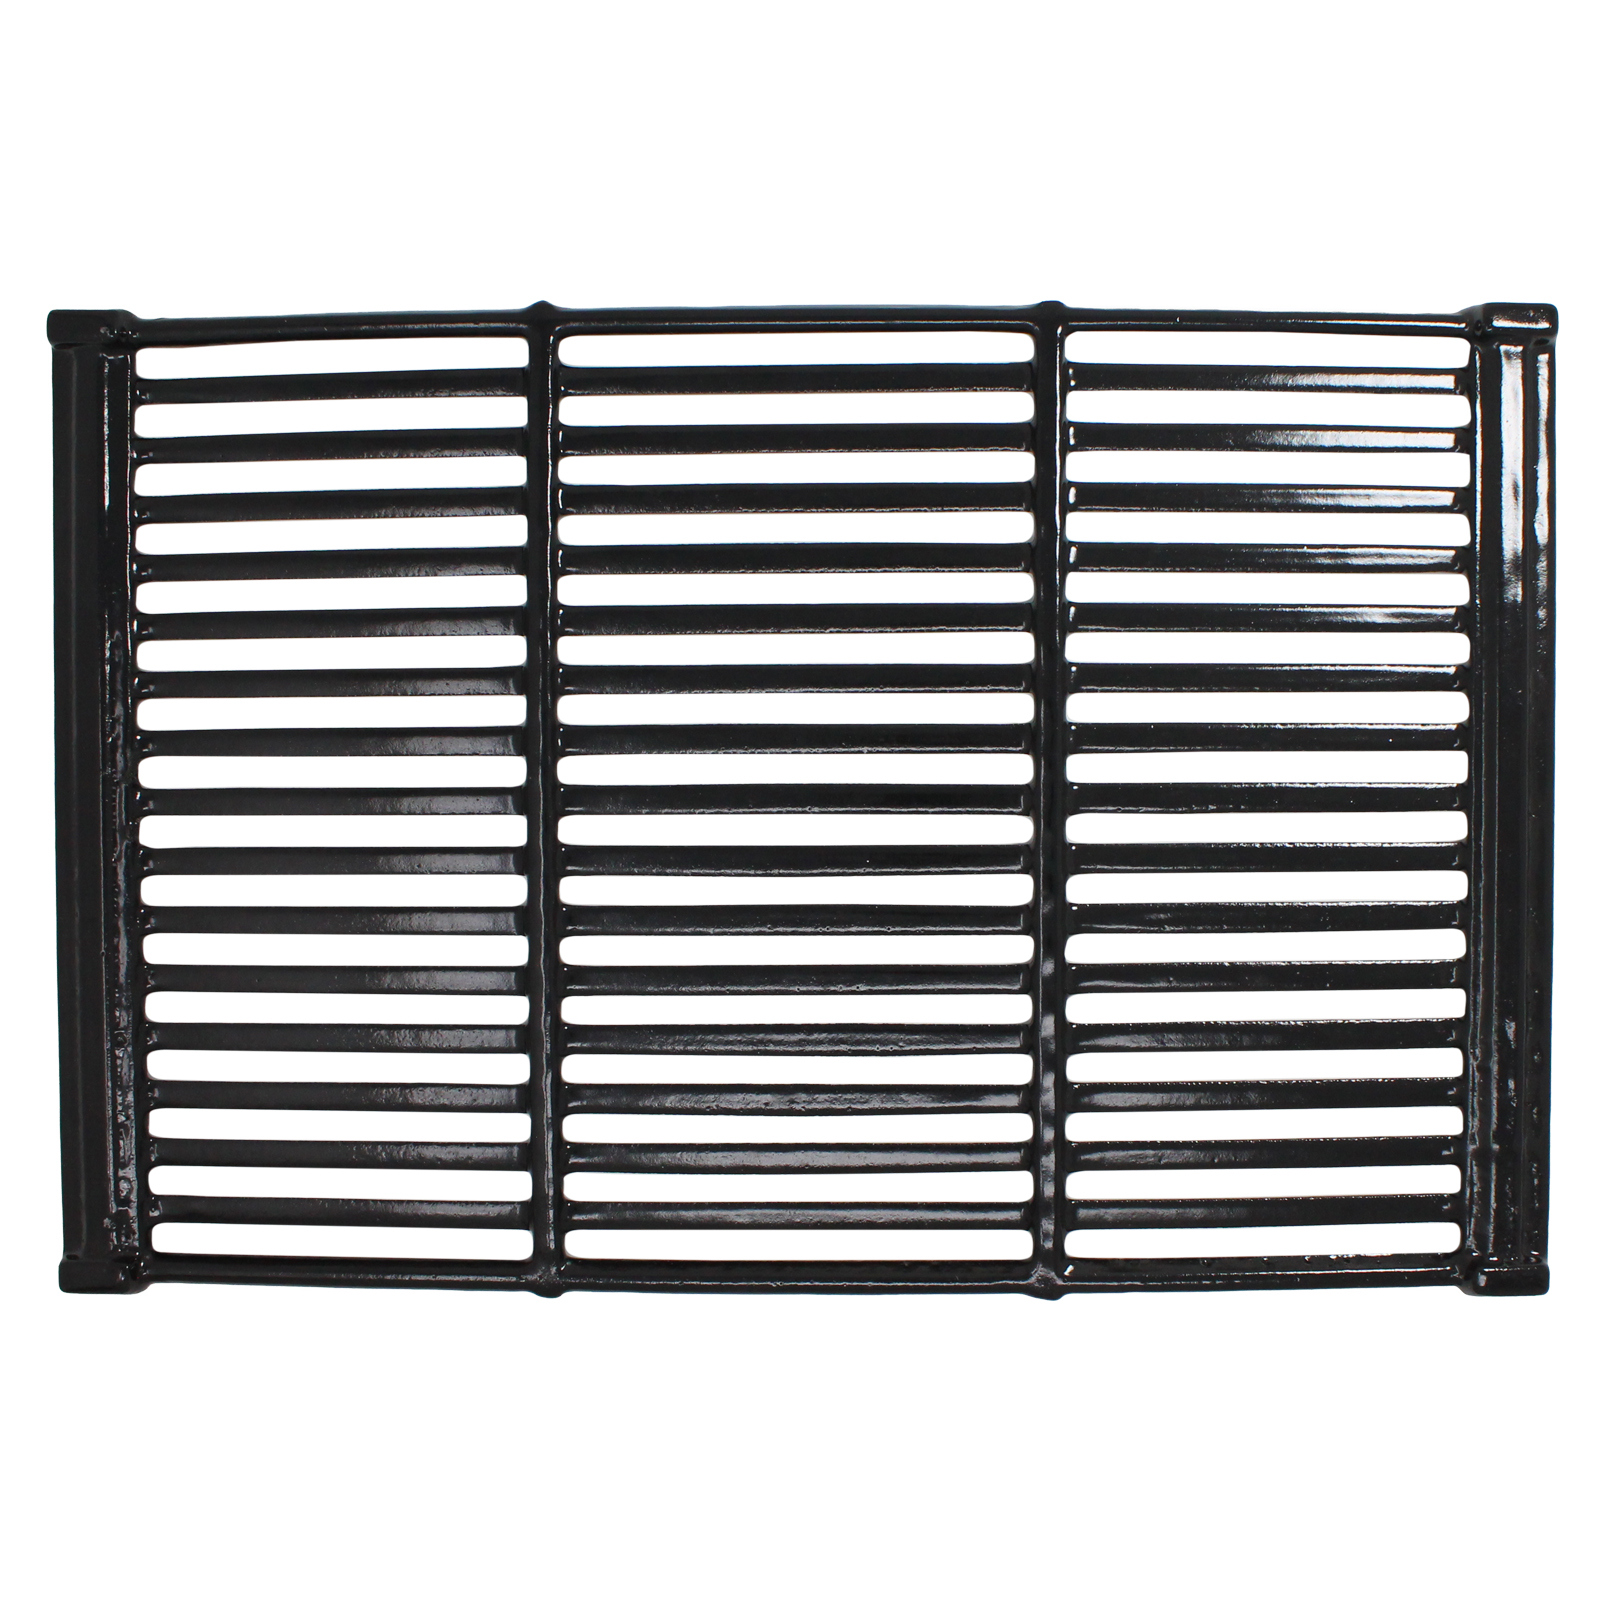 BBQ Grill Cooking Grates Replacement Parts for Brinkmann 810-8401-S - Compatible Barbeque Porcelain Enameled Cast Iron Grid 19" - image 2 of 4